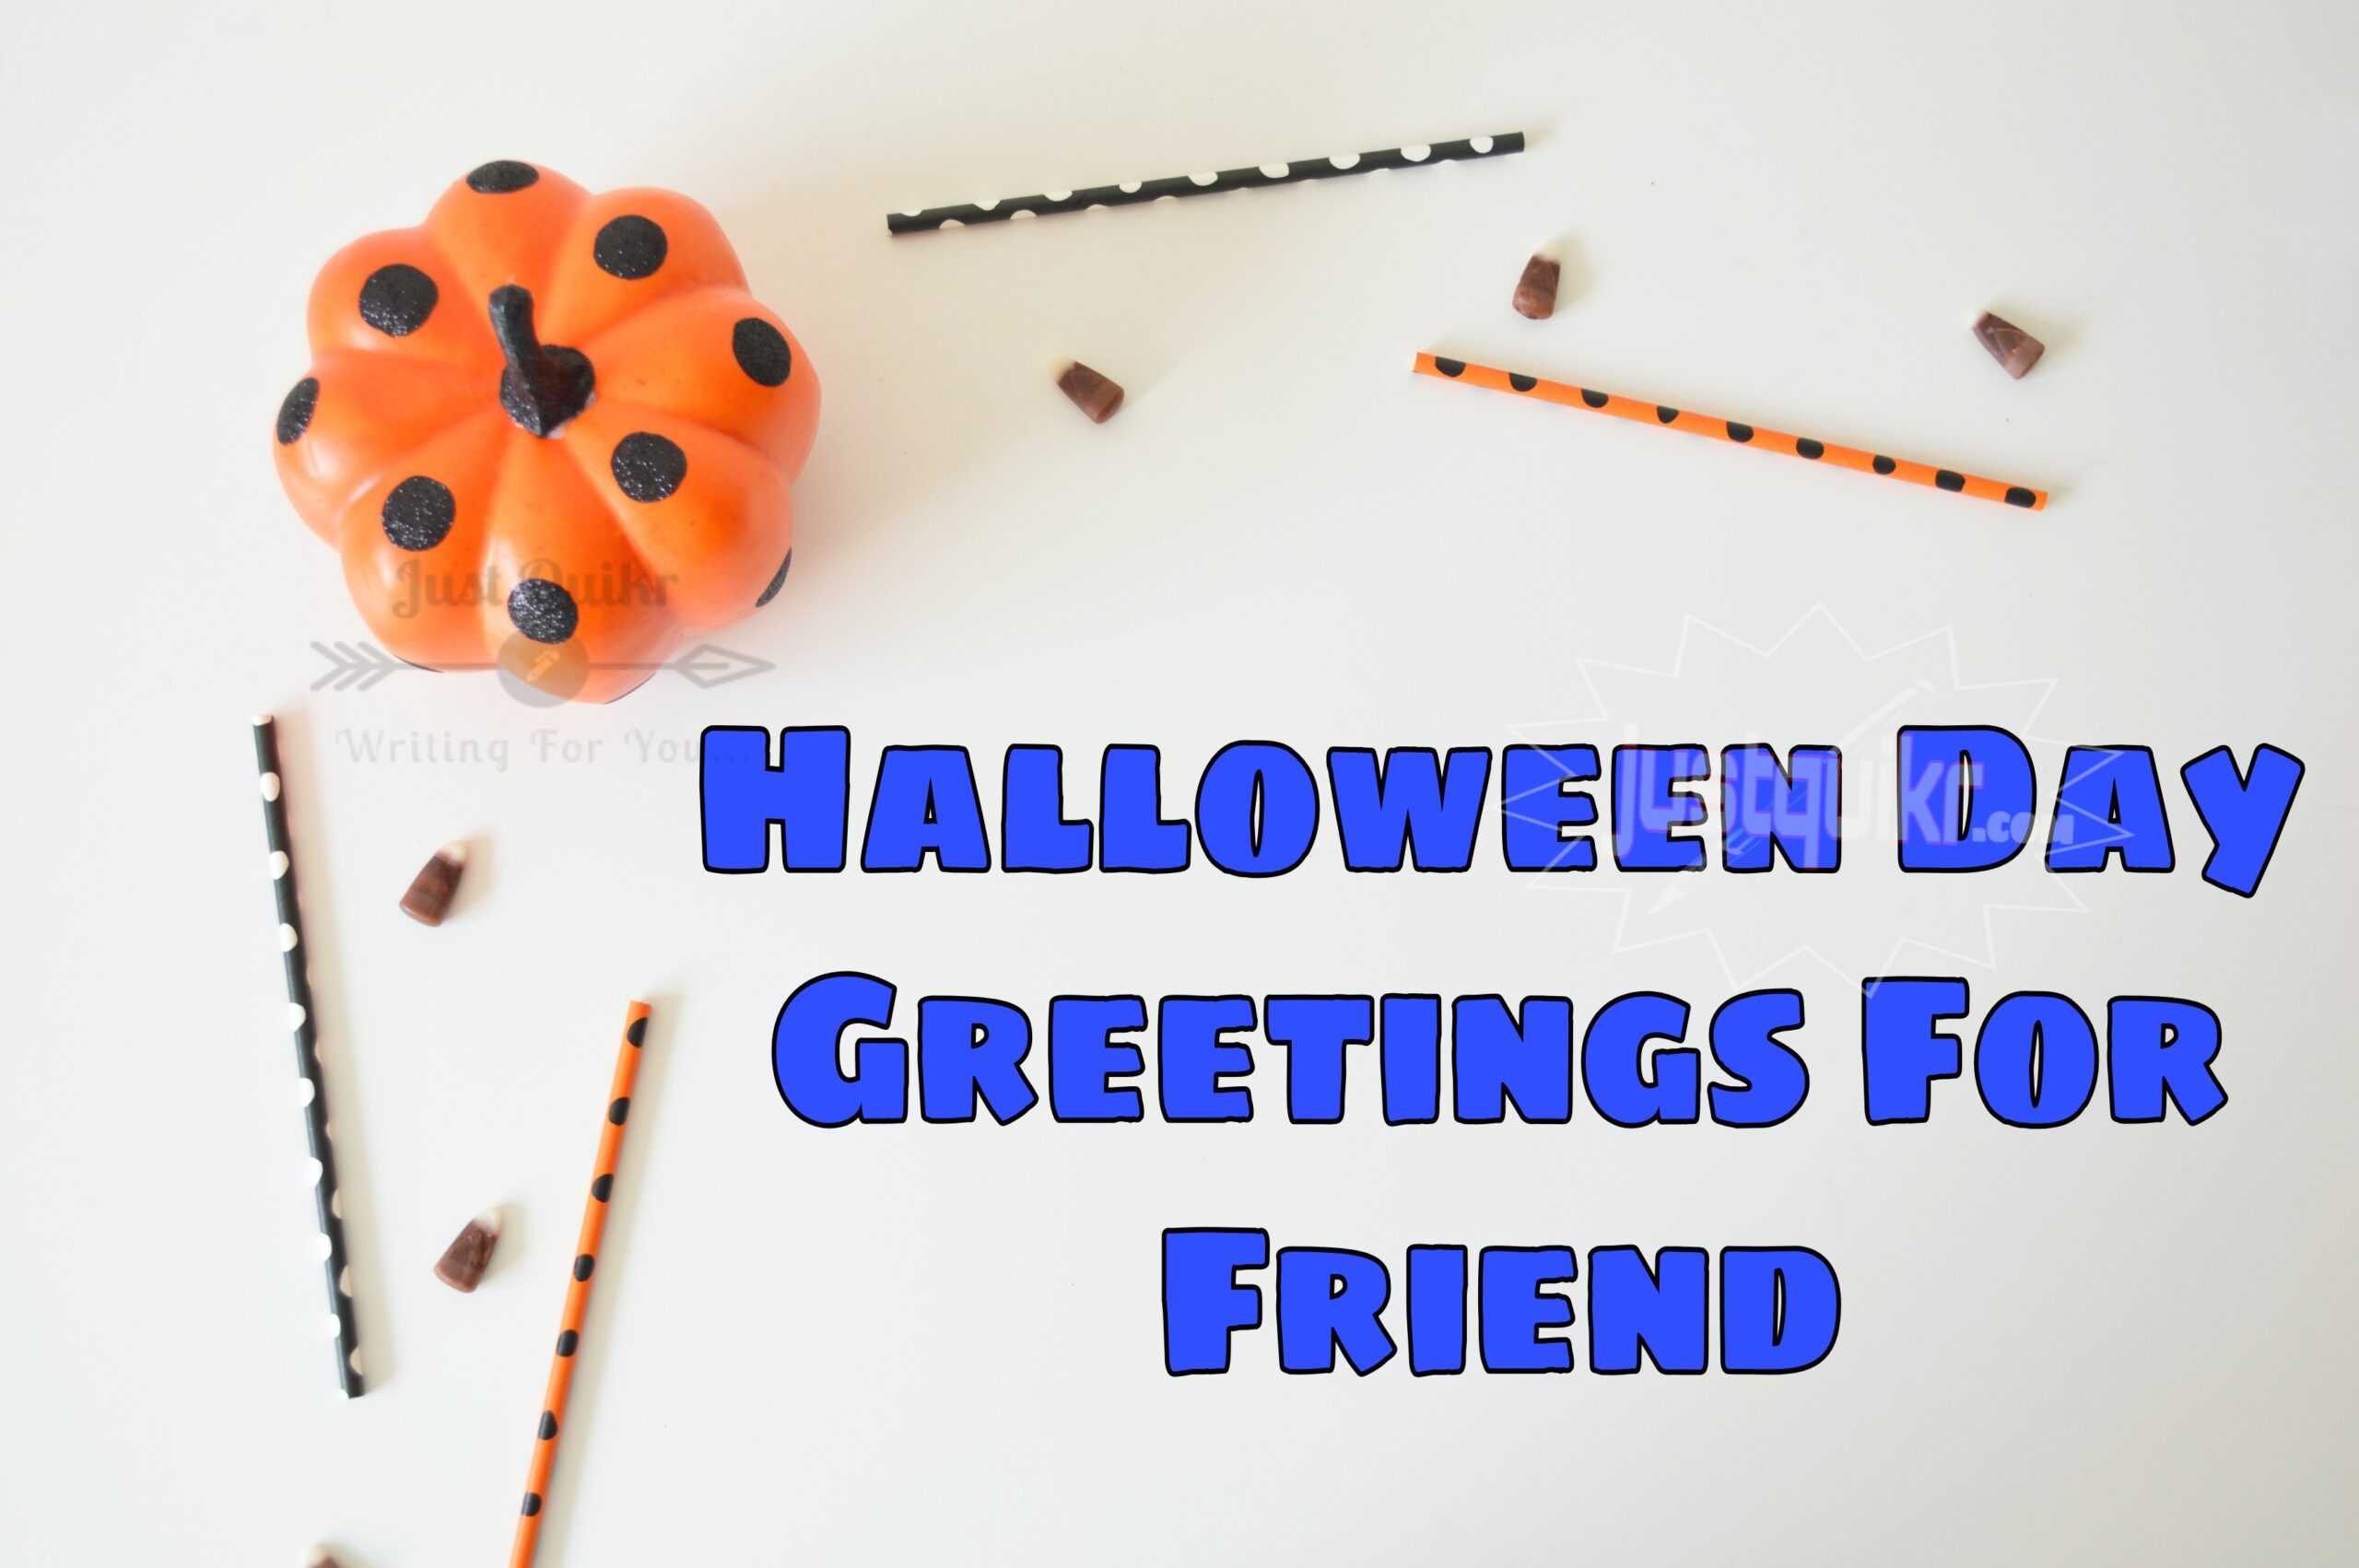 Halloween Day Greetings For Friend